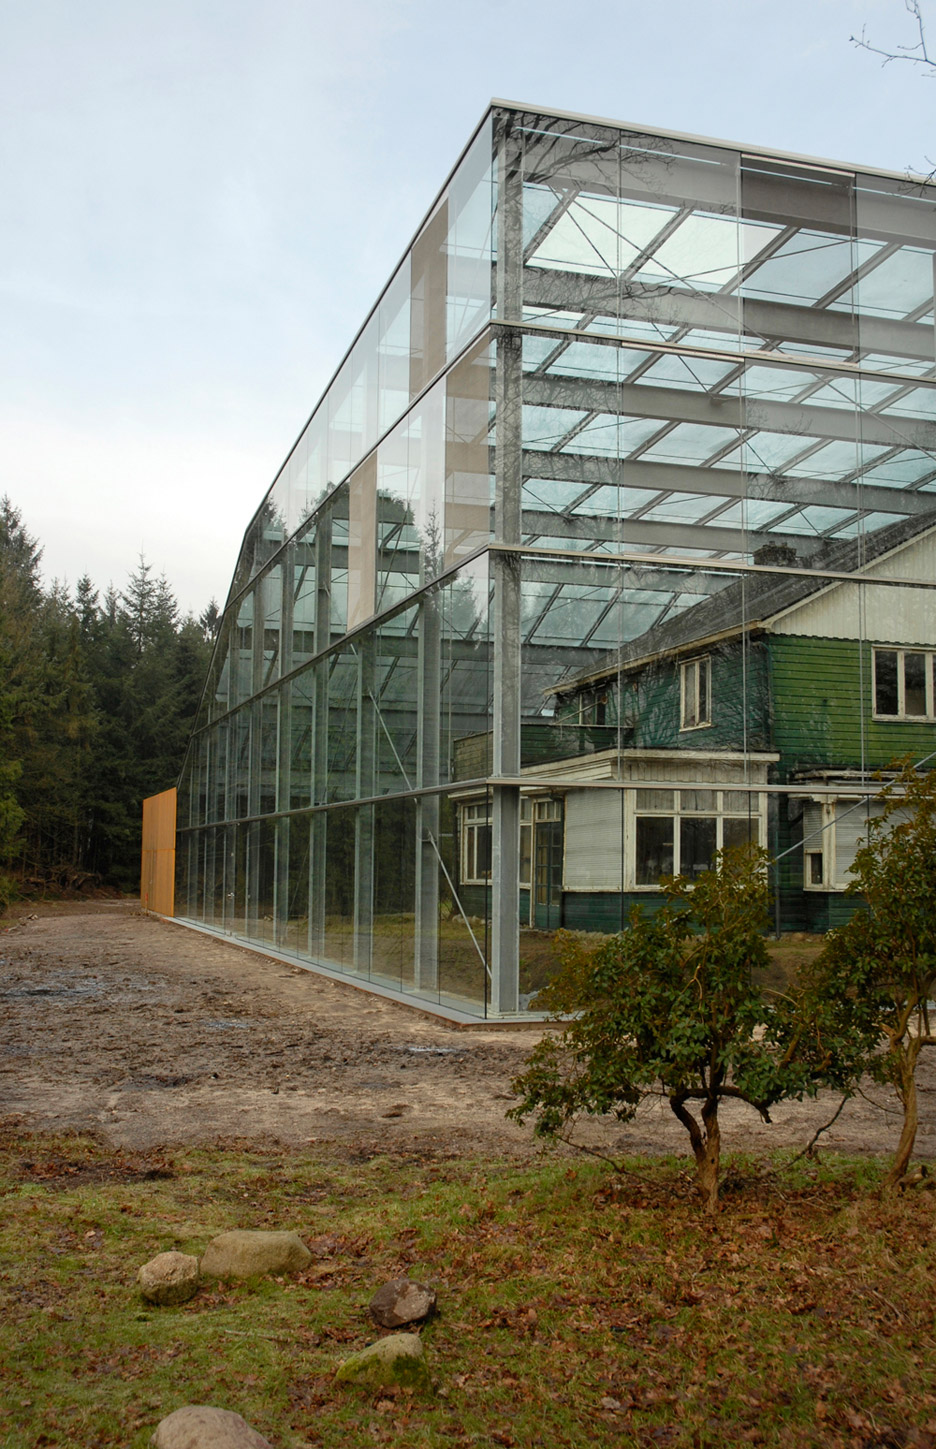 Oving Architecten Shrouds Concentration Camp House In Glass As A Memorial To The Holocaust